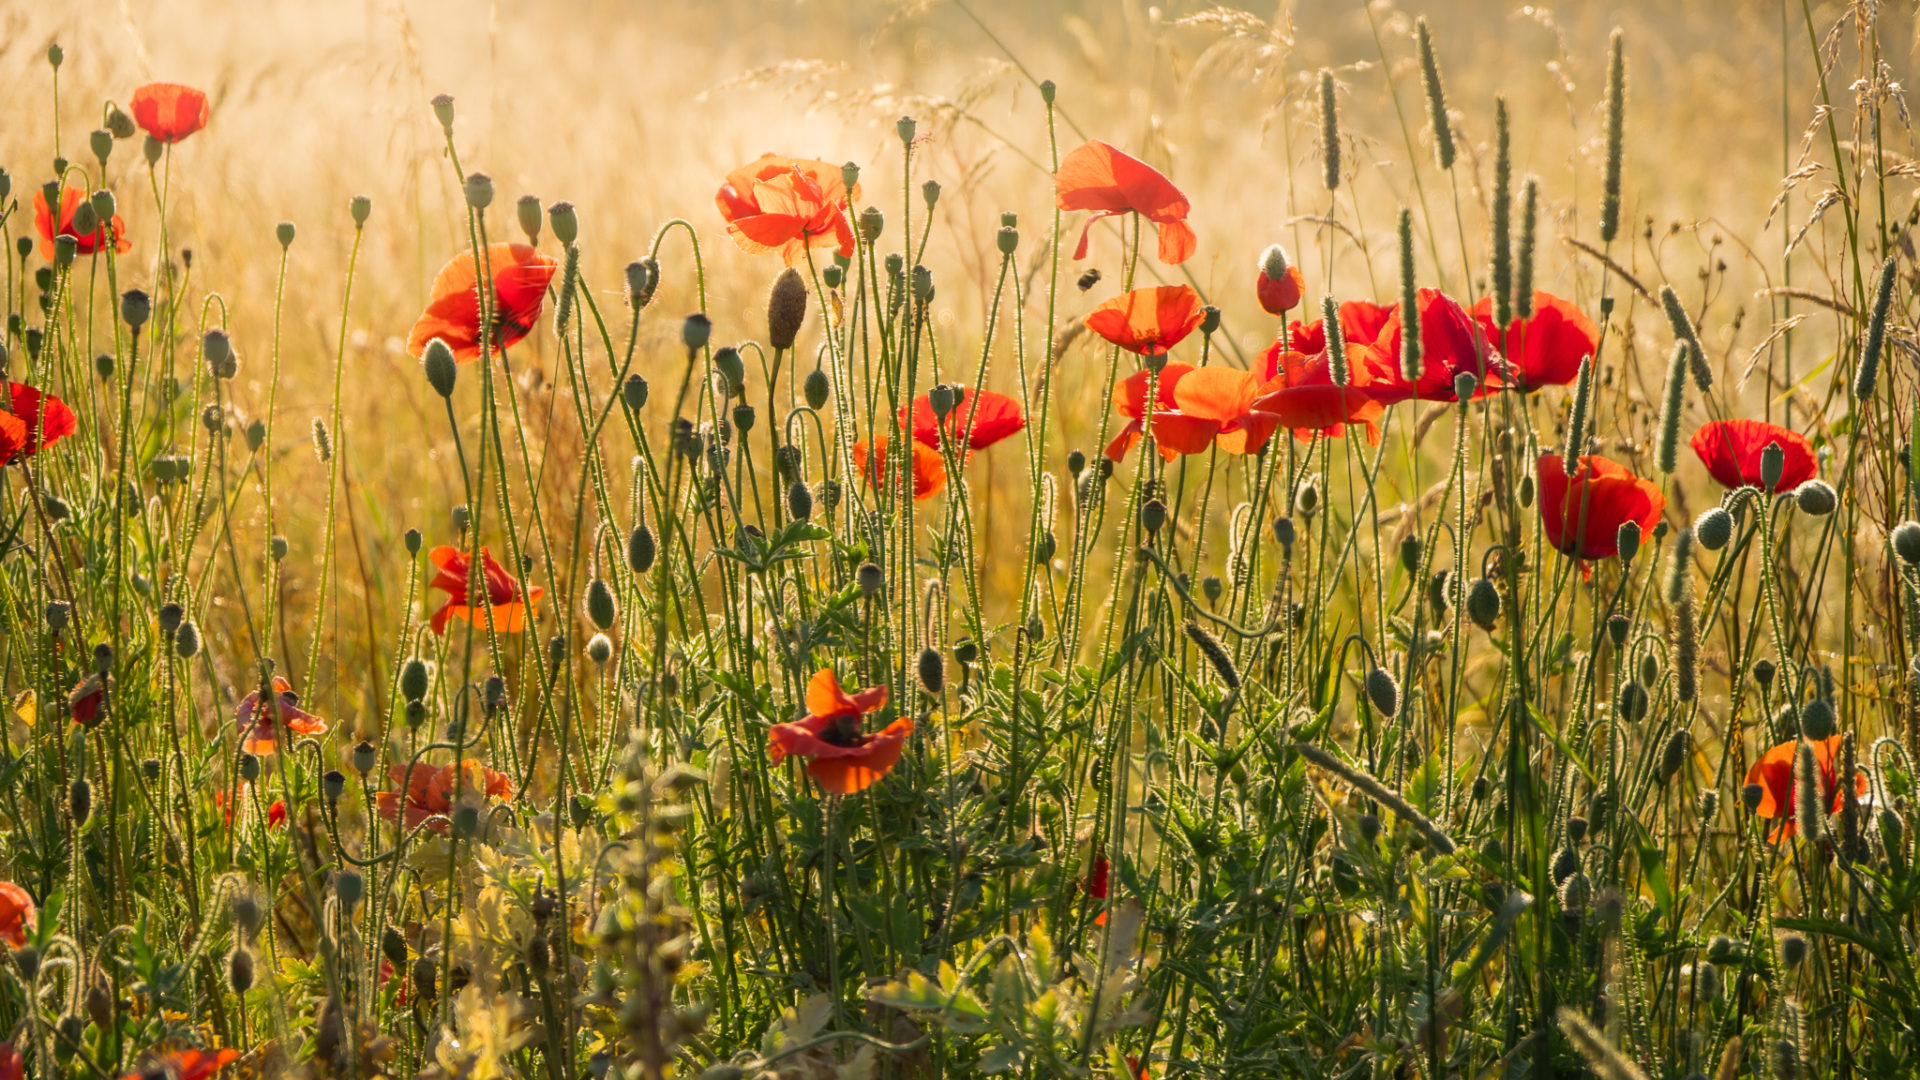 poppies in a field in early morning light